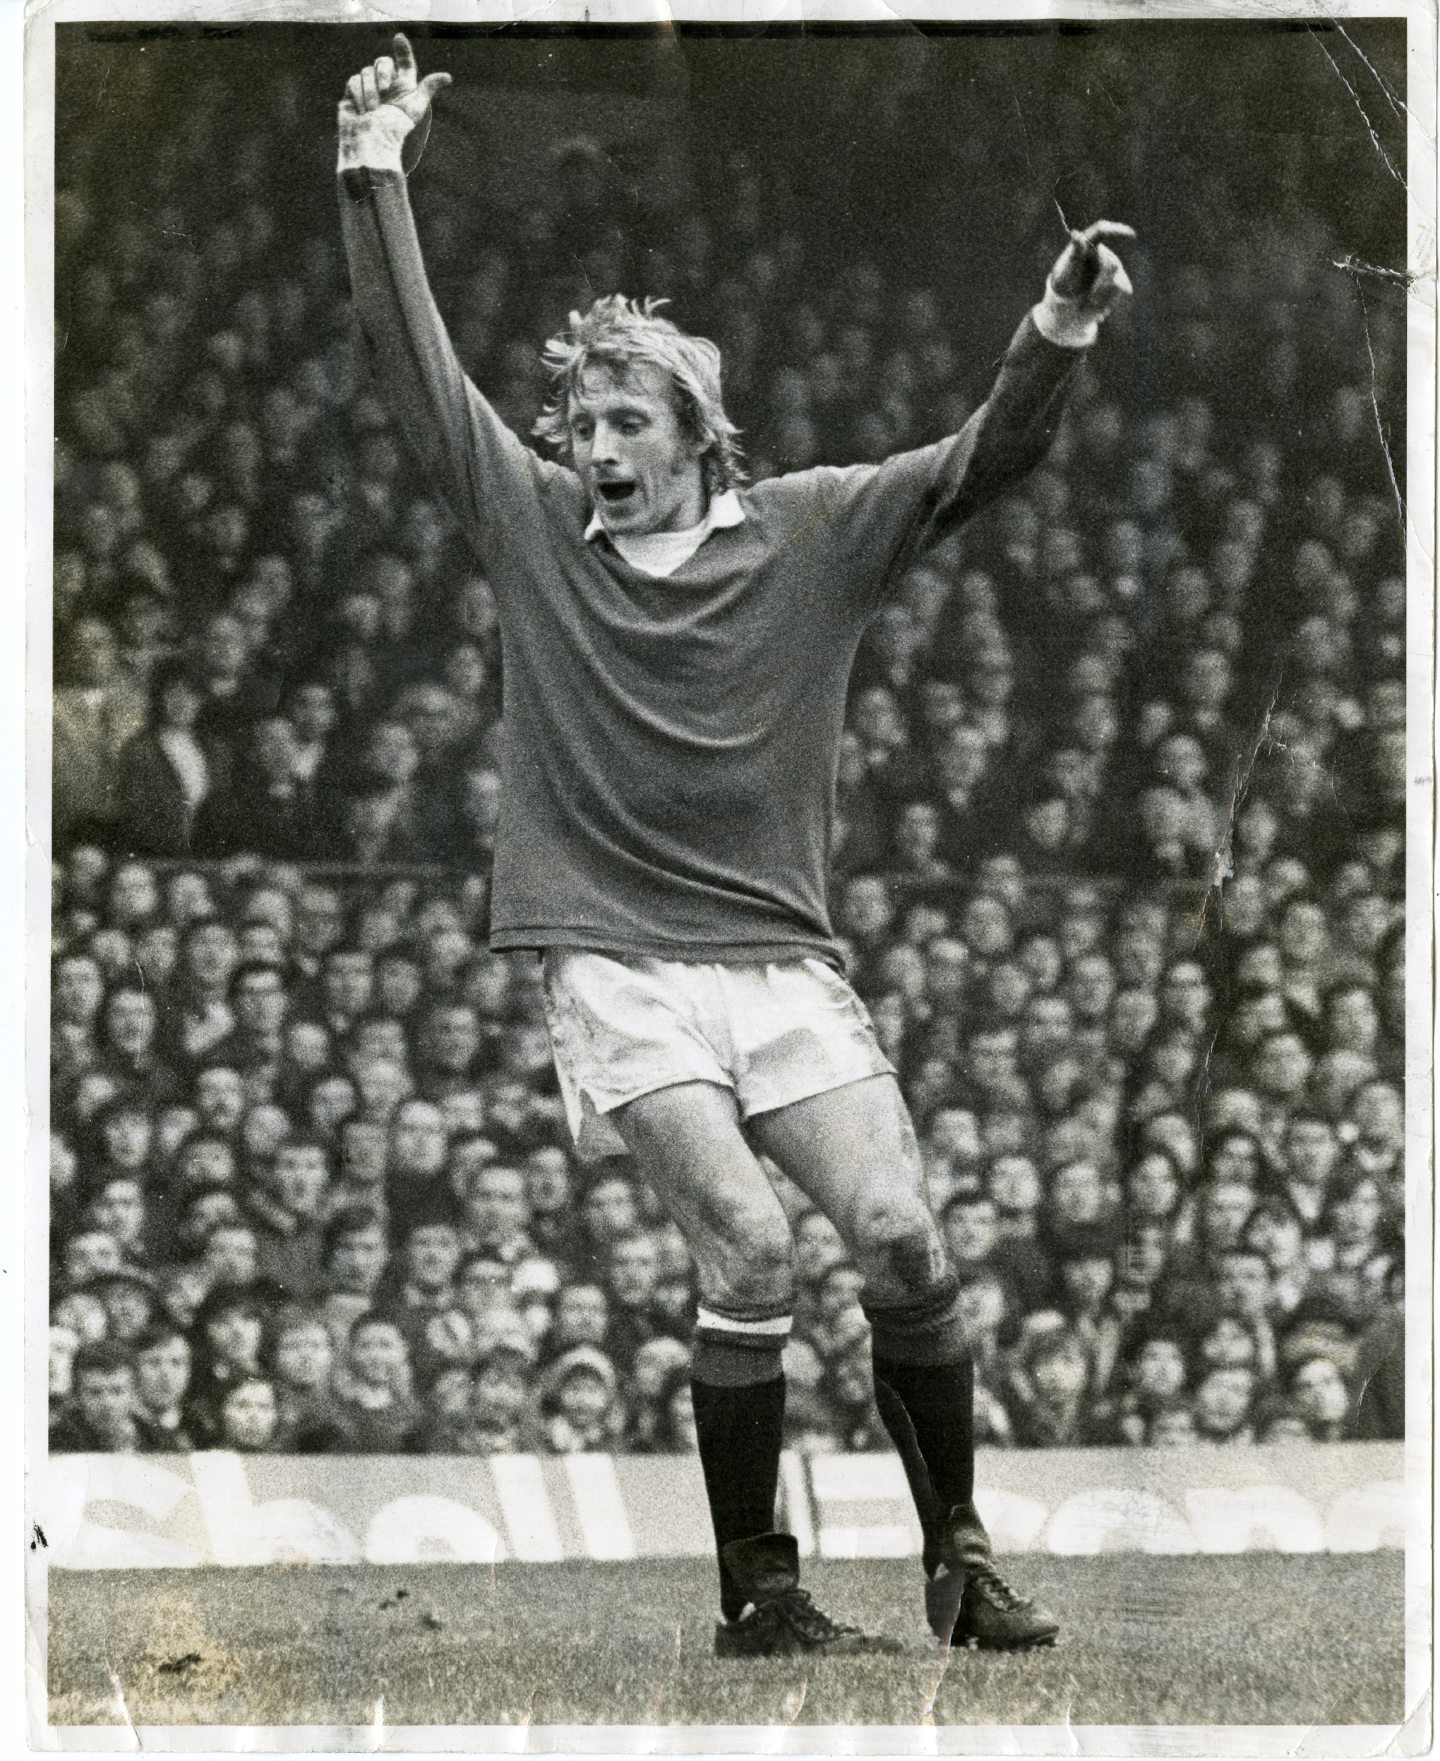 Denis Law in action for Manchester United in 1972.